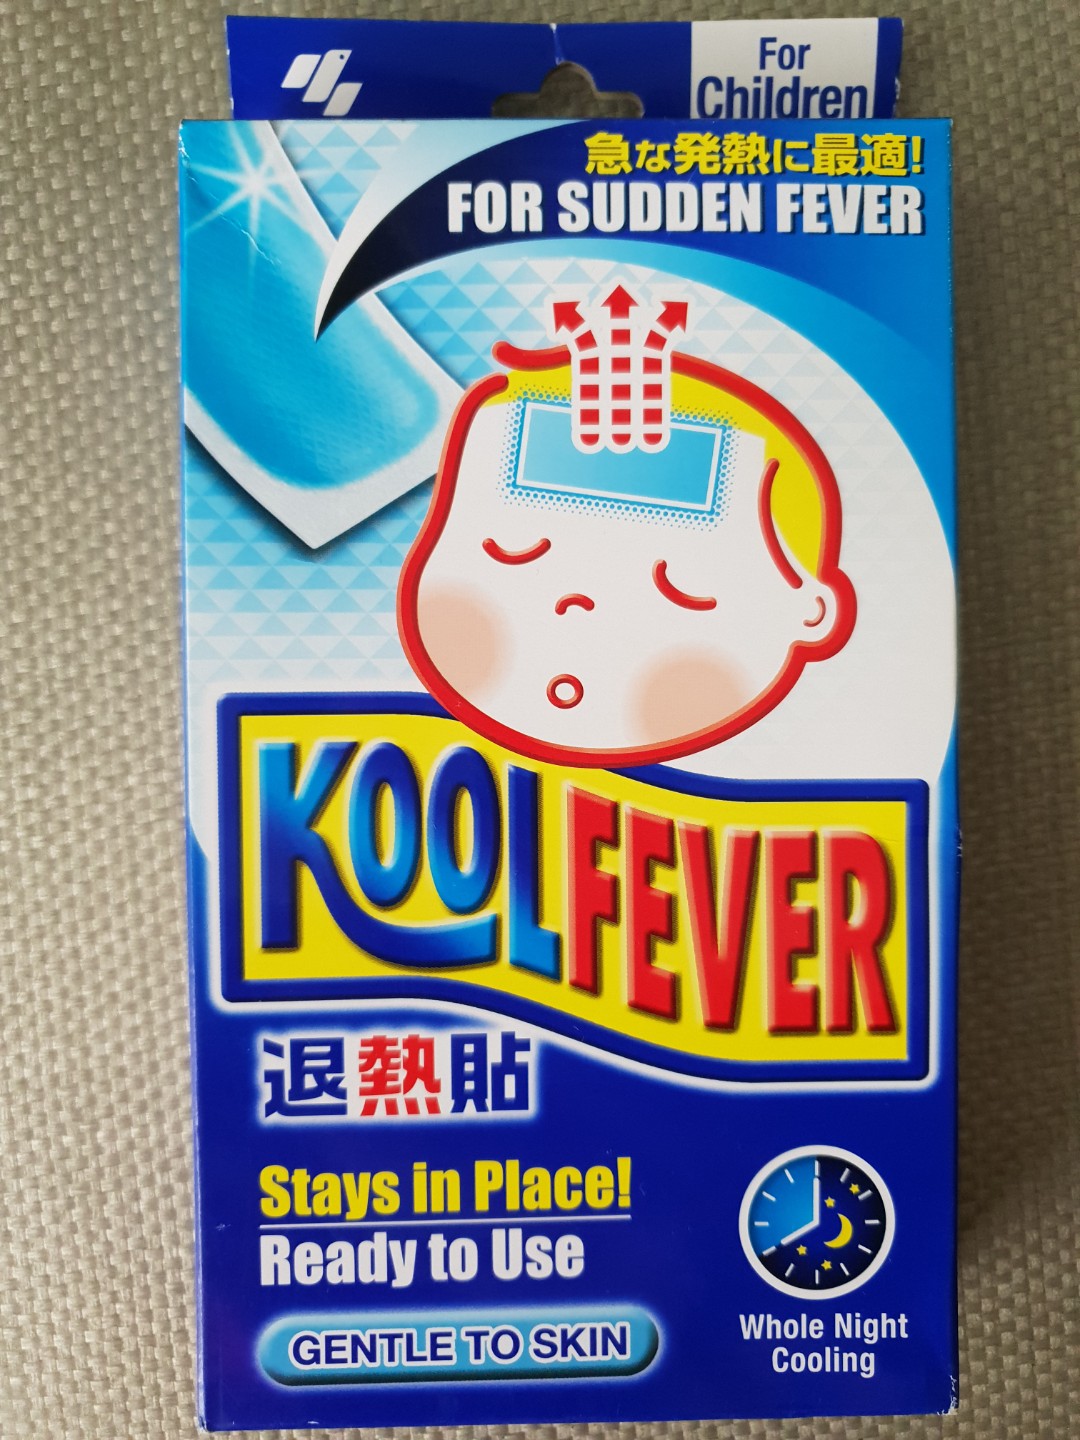 kids fever patch